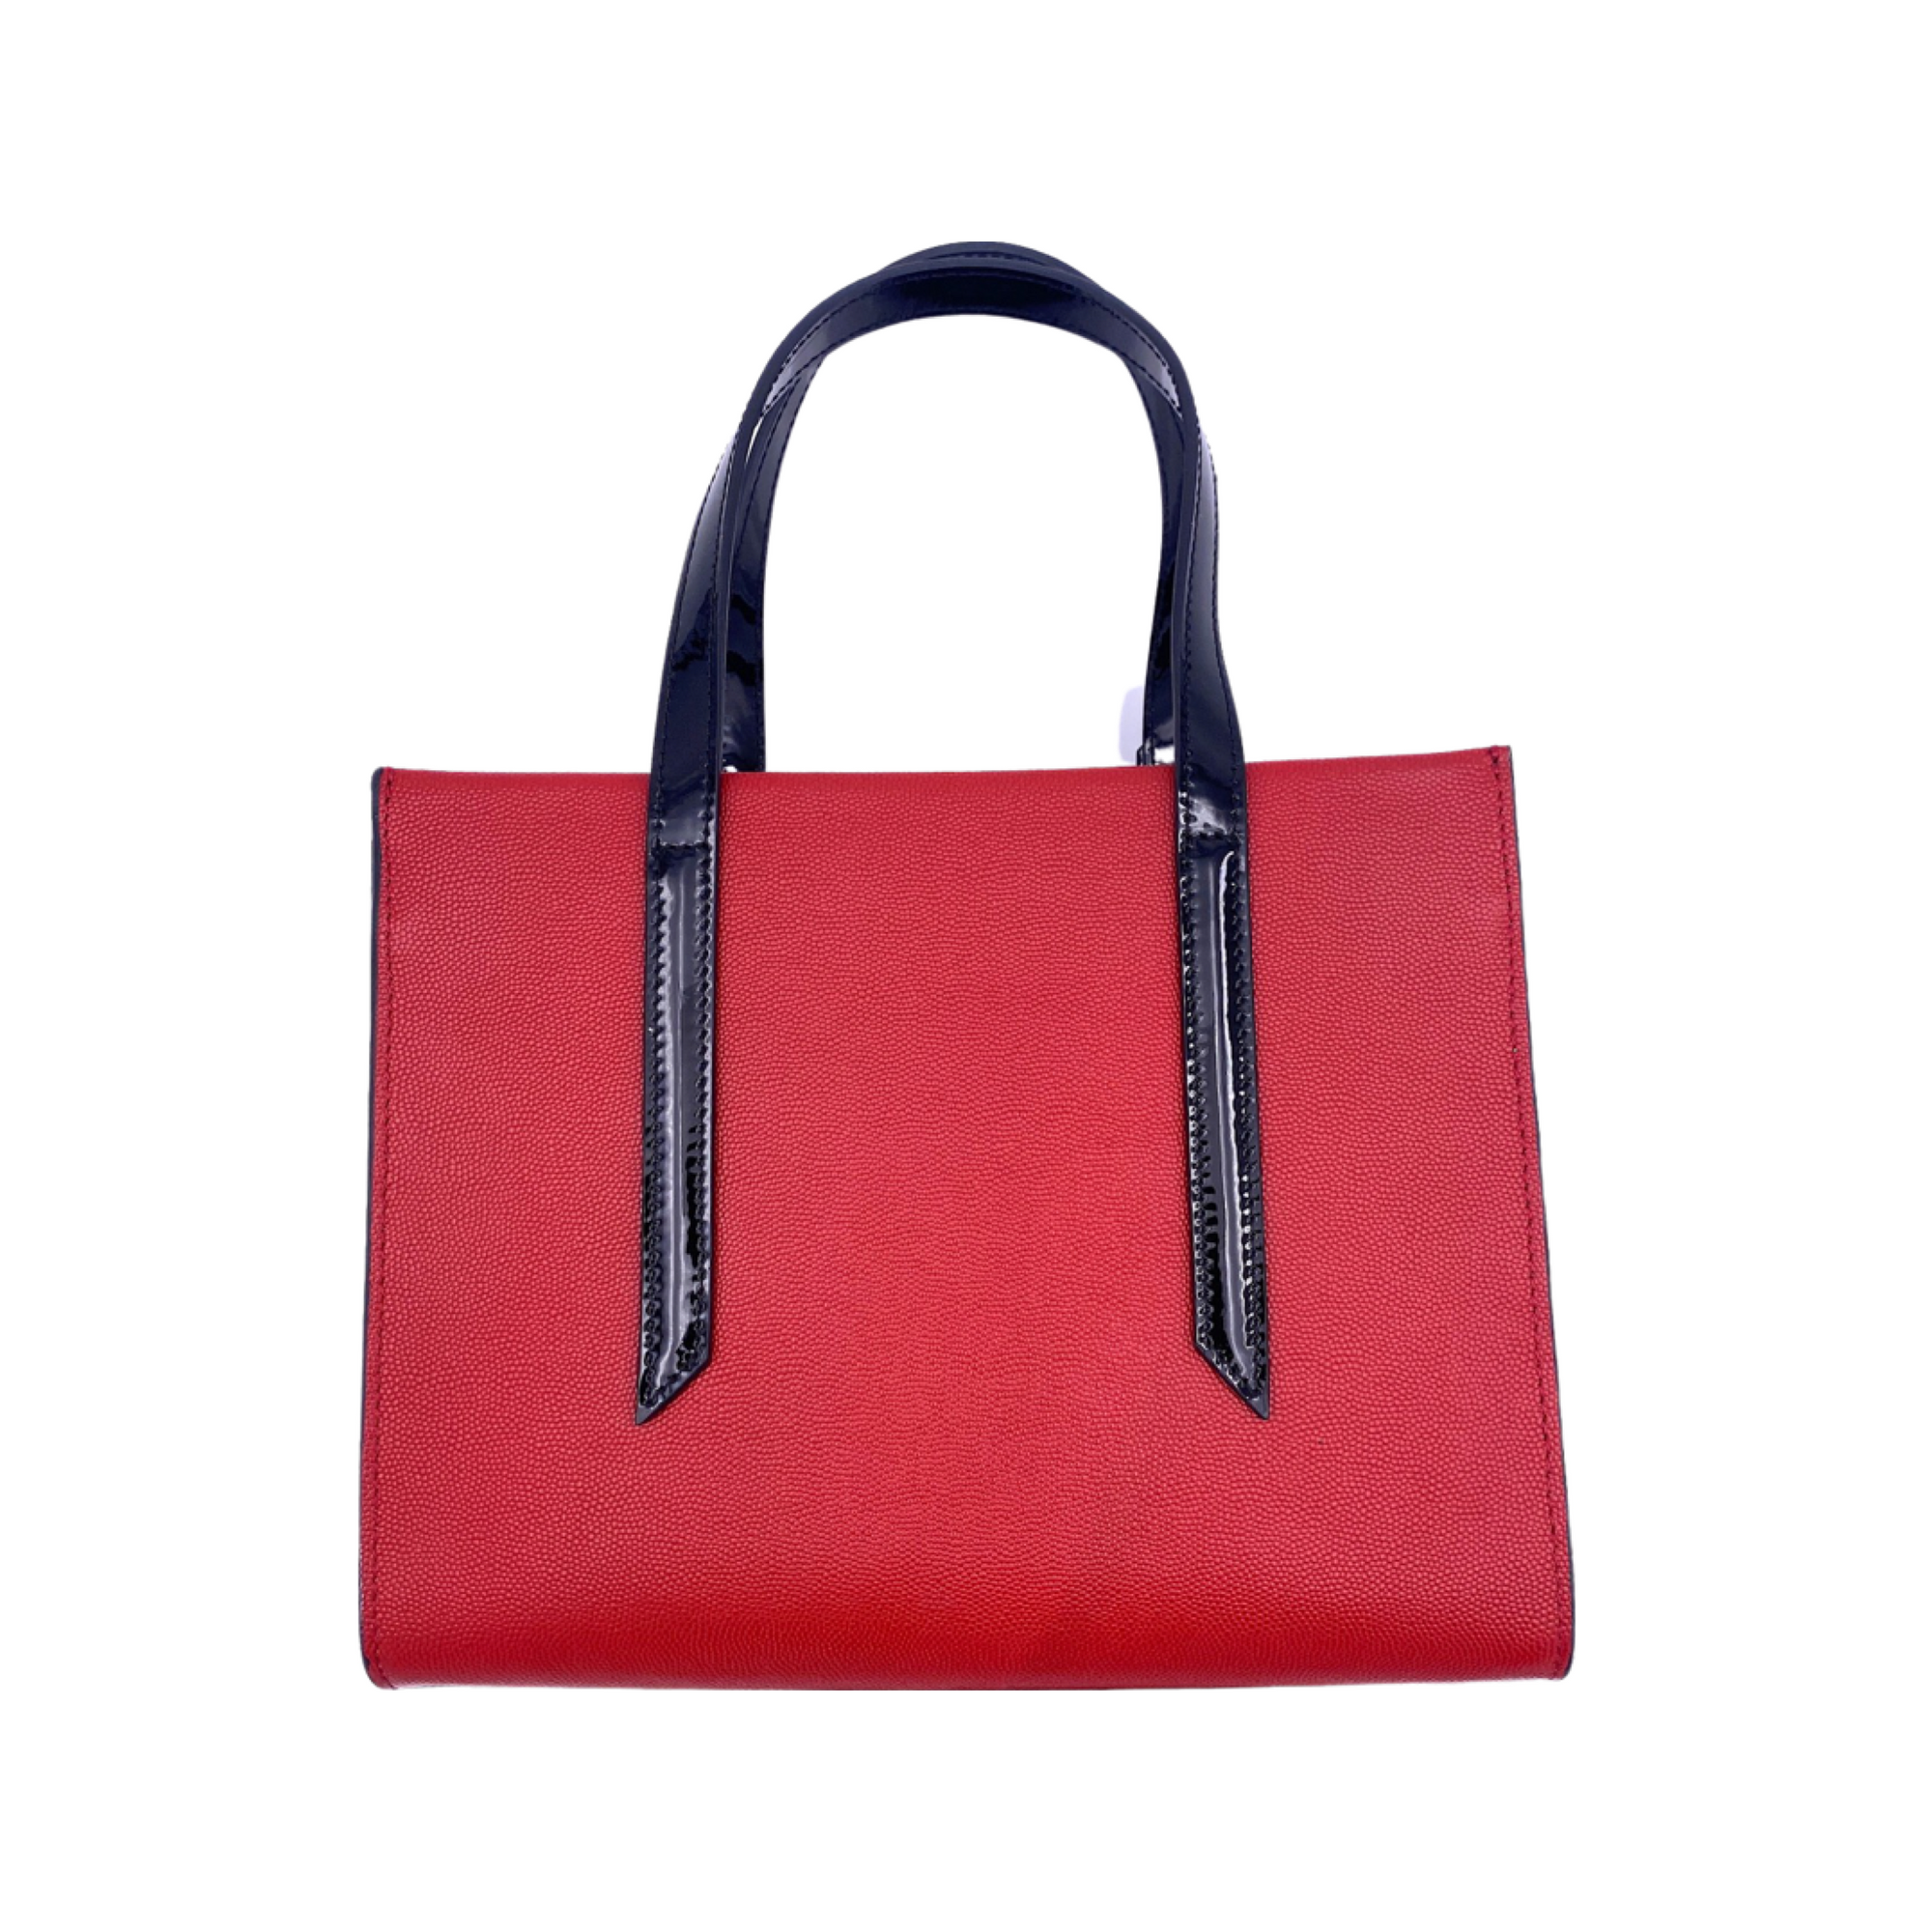 Park Avenue Bag in Red